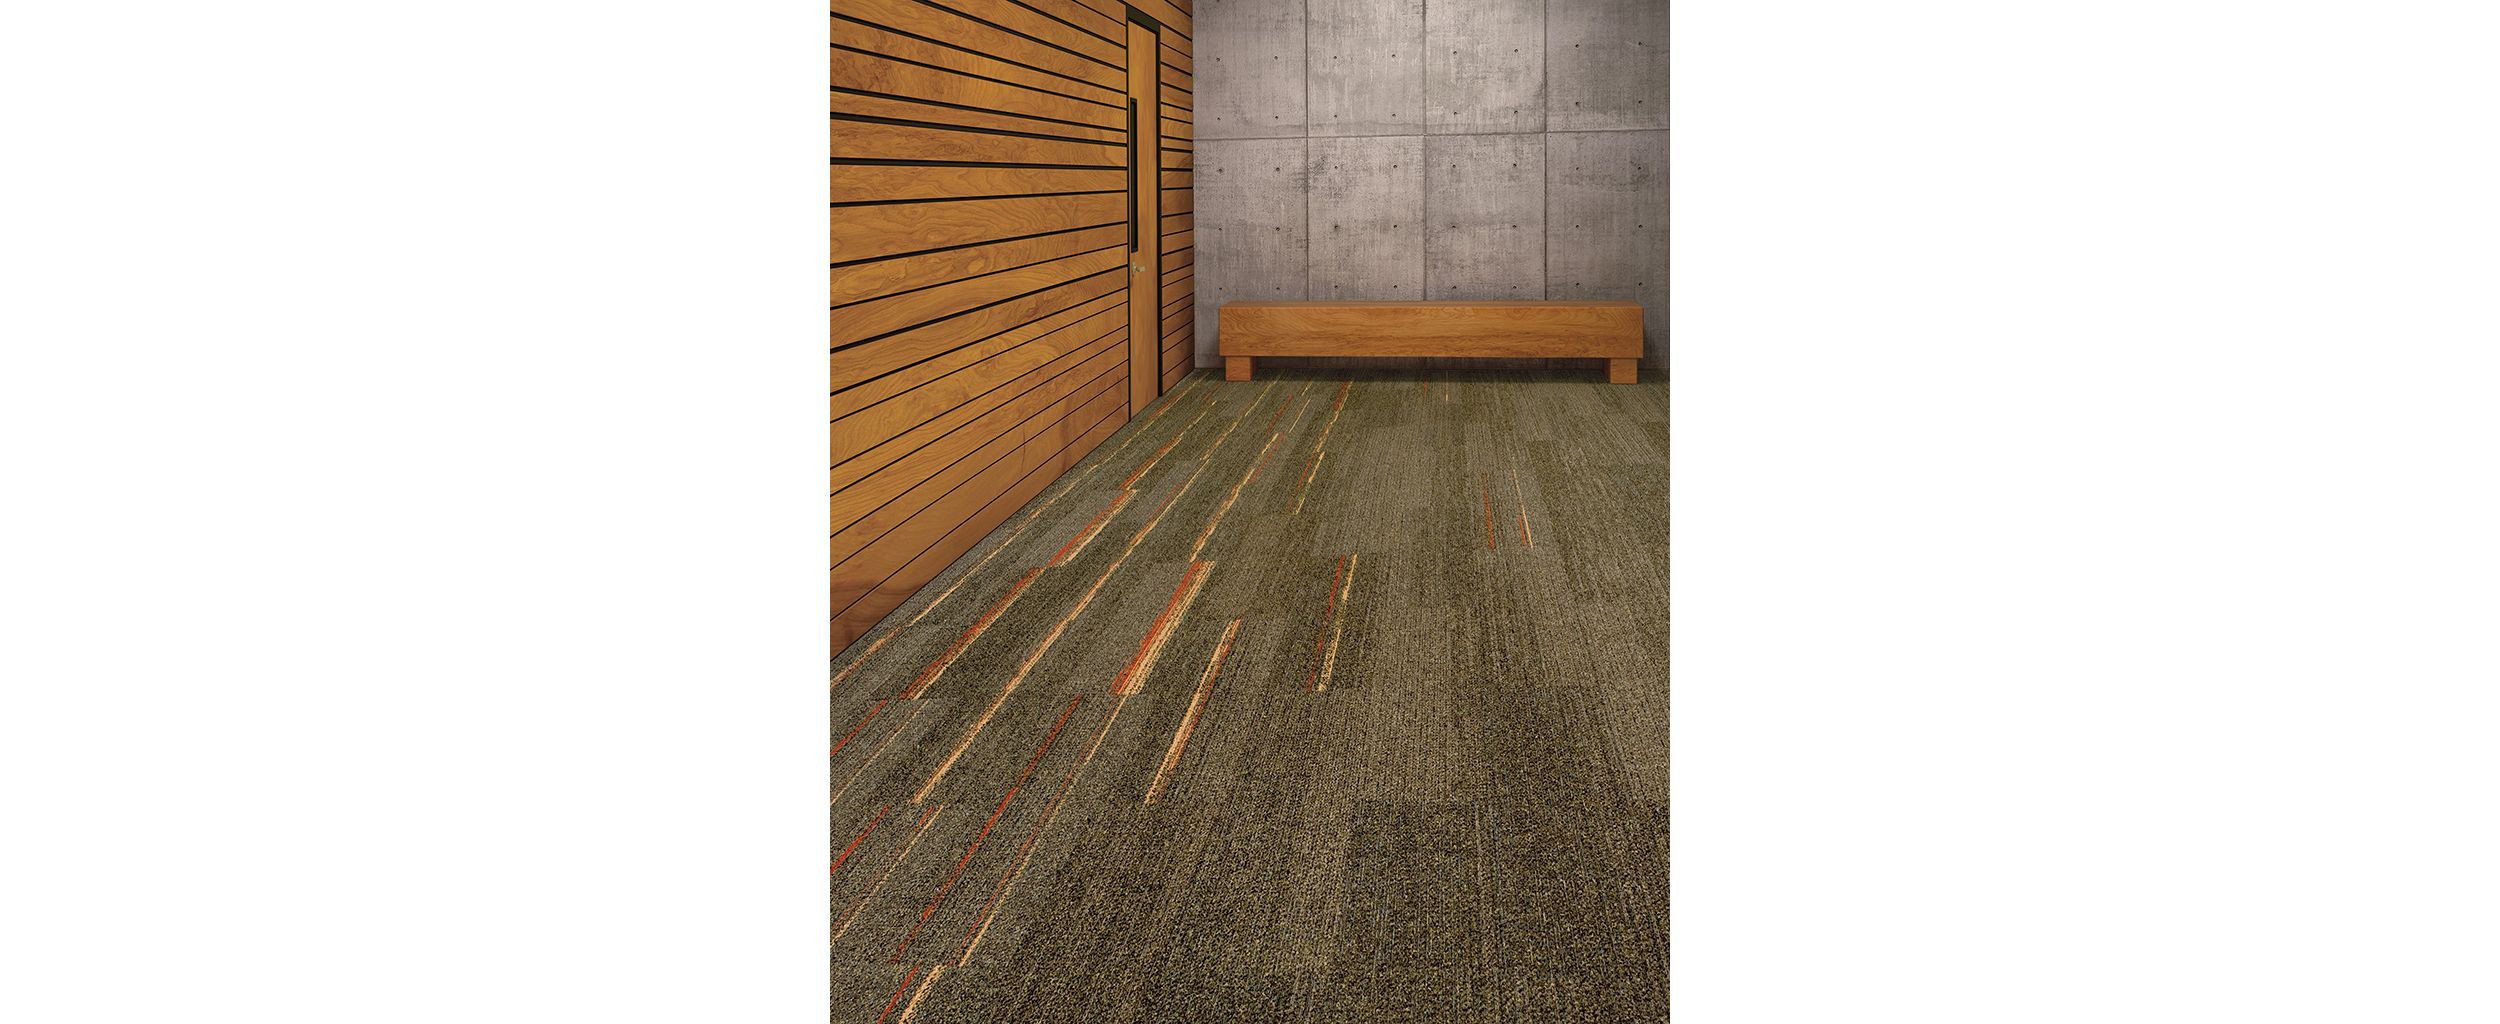 Interface Ground Waves and Harmonize plank carpet tile against wood and cement walls with wood bench imagen número 3